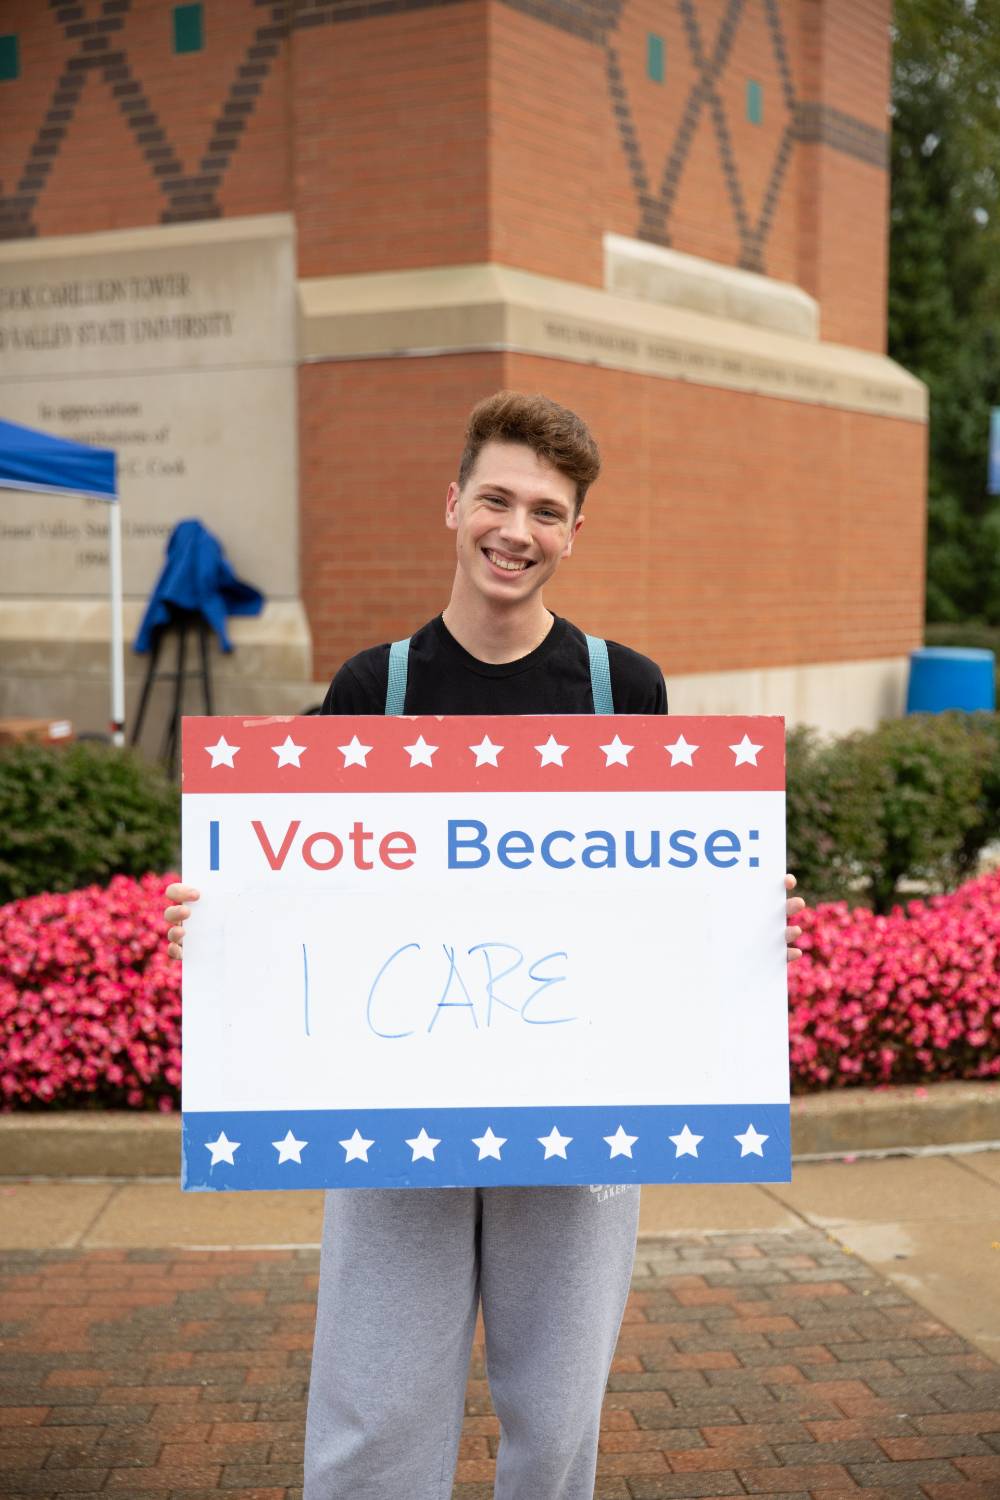 Student holding sign titled "I vote because: I care"